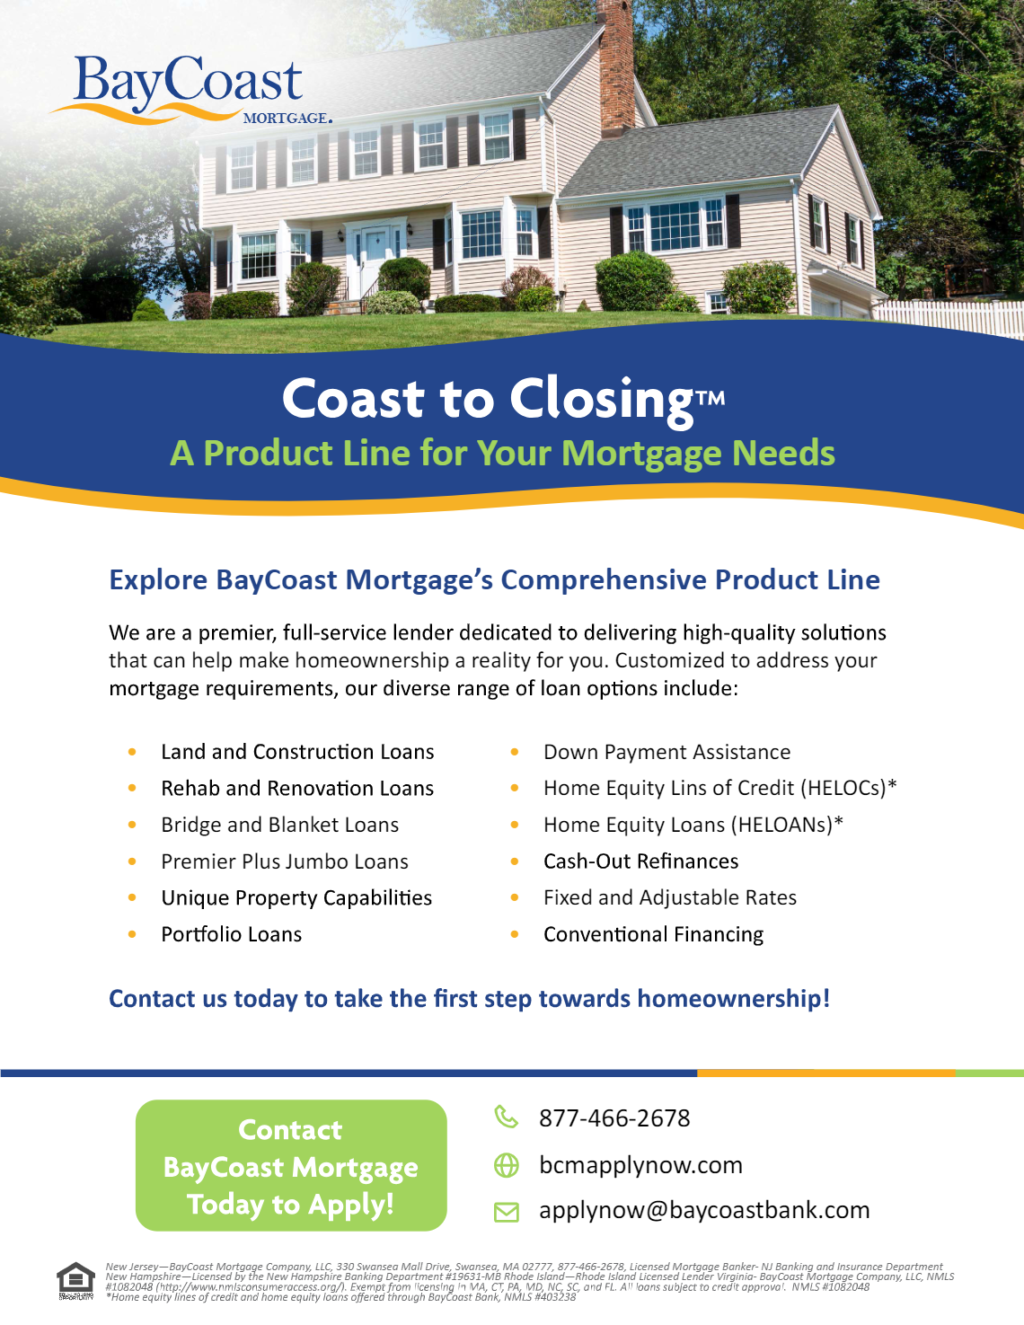 Coast to Coast Closing™ A Product Line for Your Mortgage Needs. Explore BayCoast Mortgage’s Comprehensive Product Line. Contact us today to take the first step toward homeownership! Call 877-466-2678 or email applynow@baycoastbank.com.